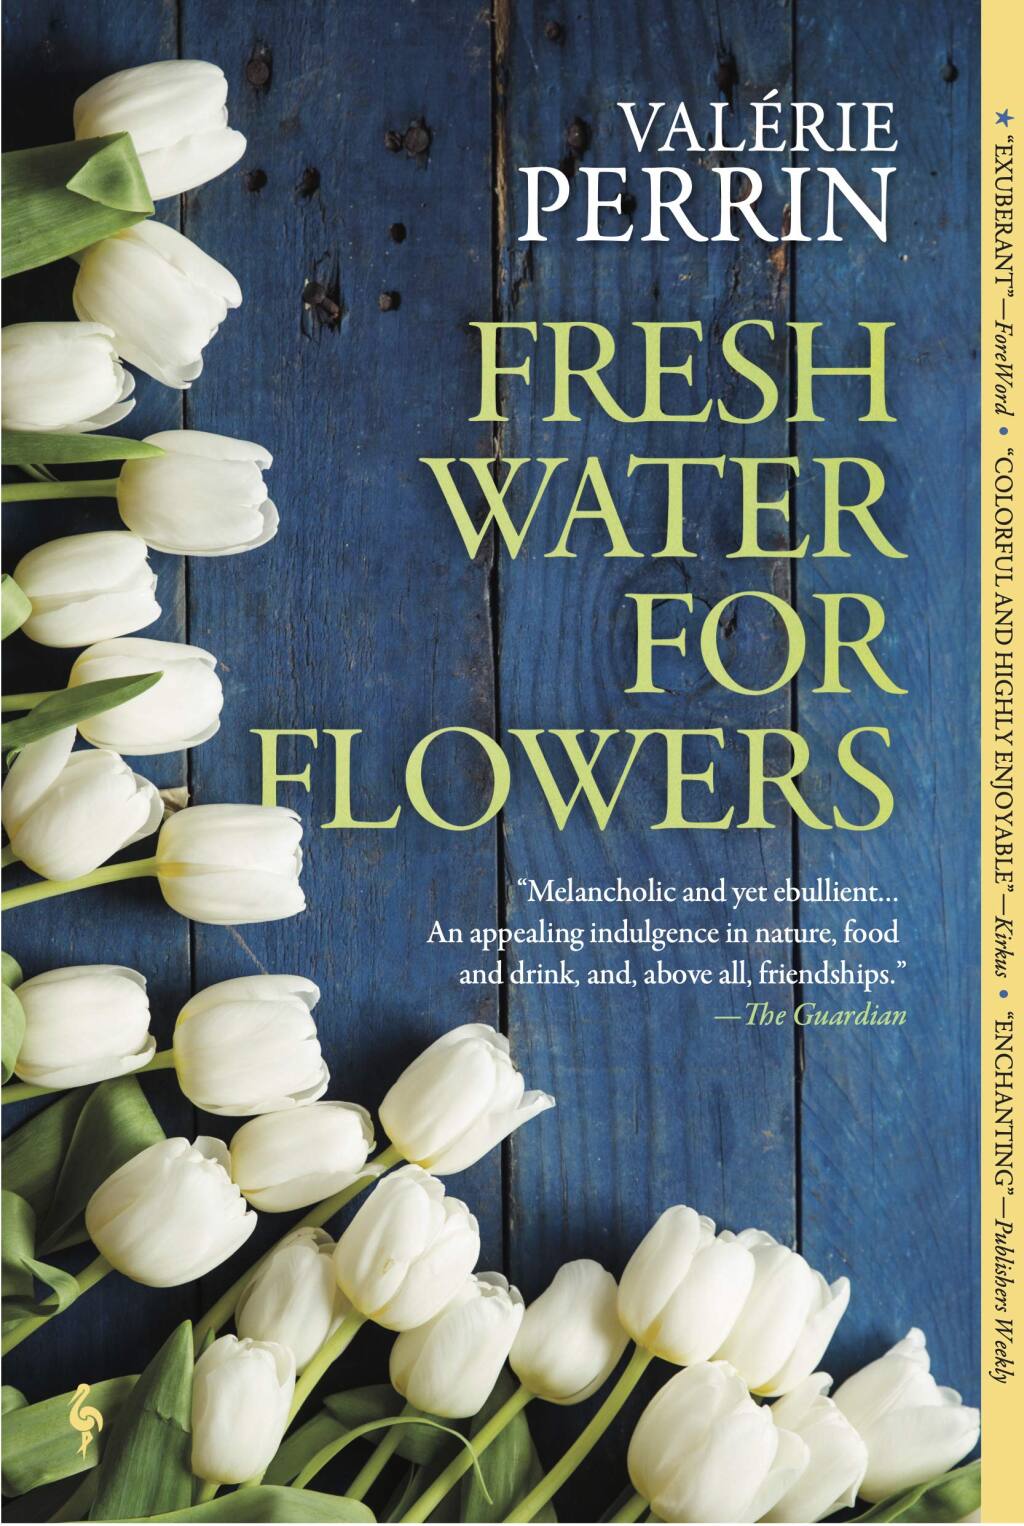 “Fresh Water for Flowers” is the No. 1 bestselling book in Petaluma this week (EUROPA EDITIONS)